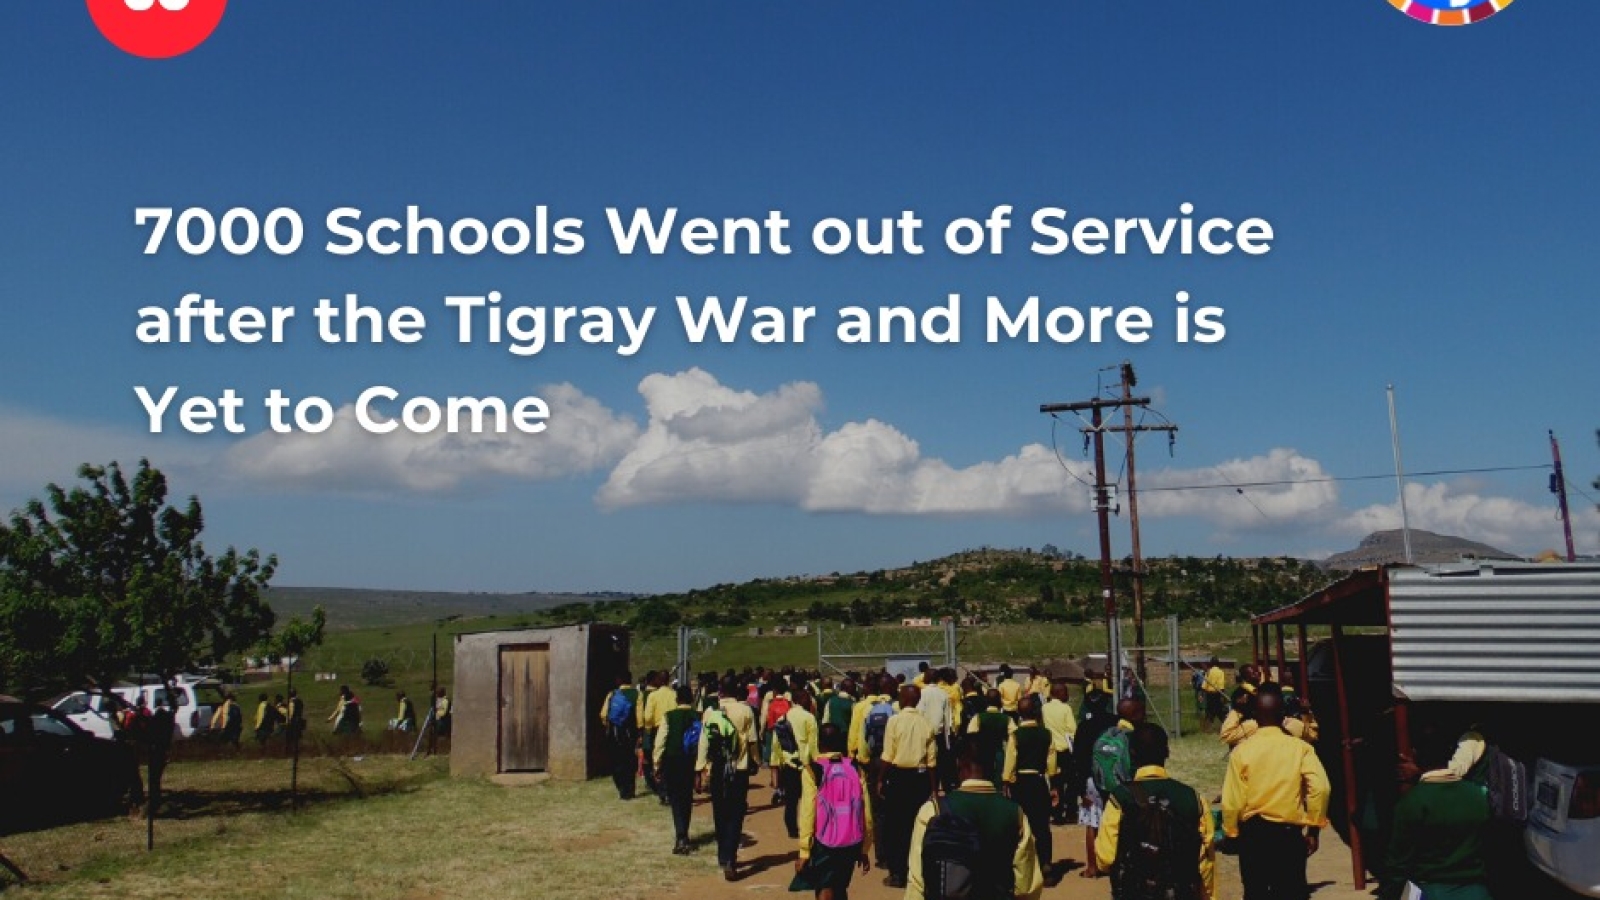 7000 Schools Went out of Service after the Tigray War and More is Yet to Come